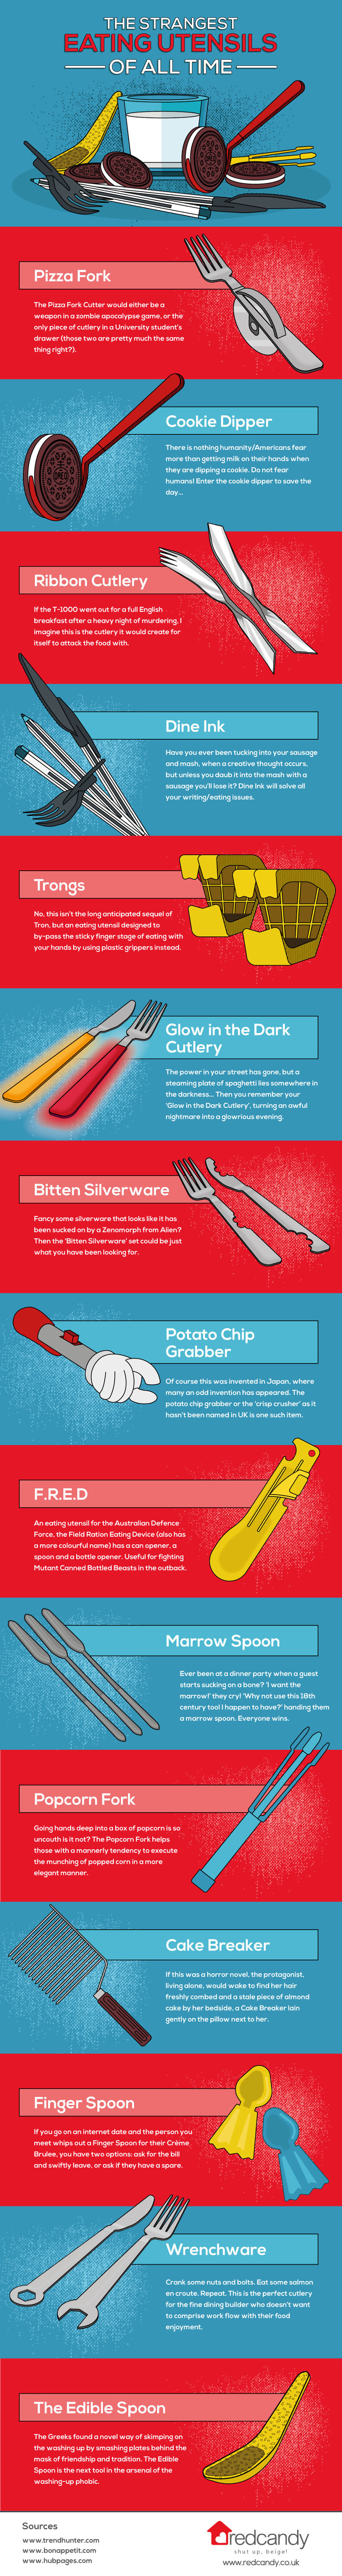 We Created An Infographic To Show The Strangest Kitchen Utensils Of All Time